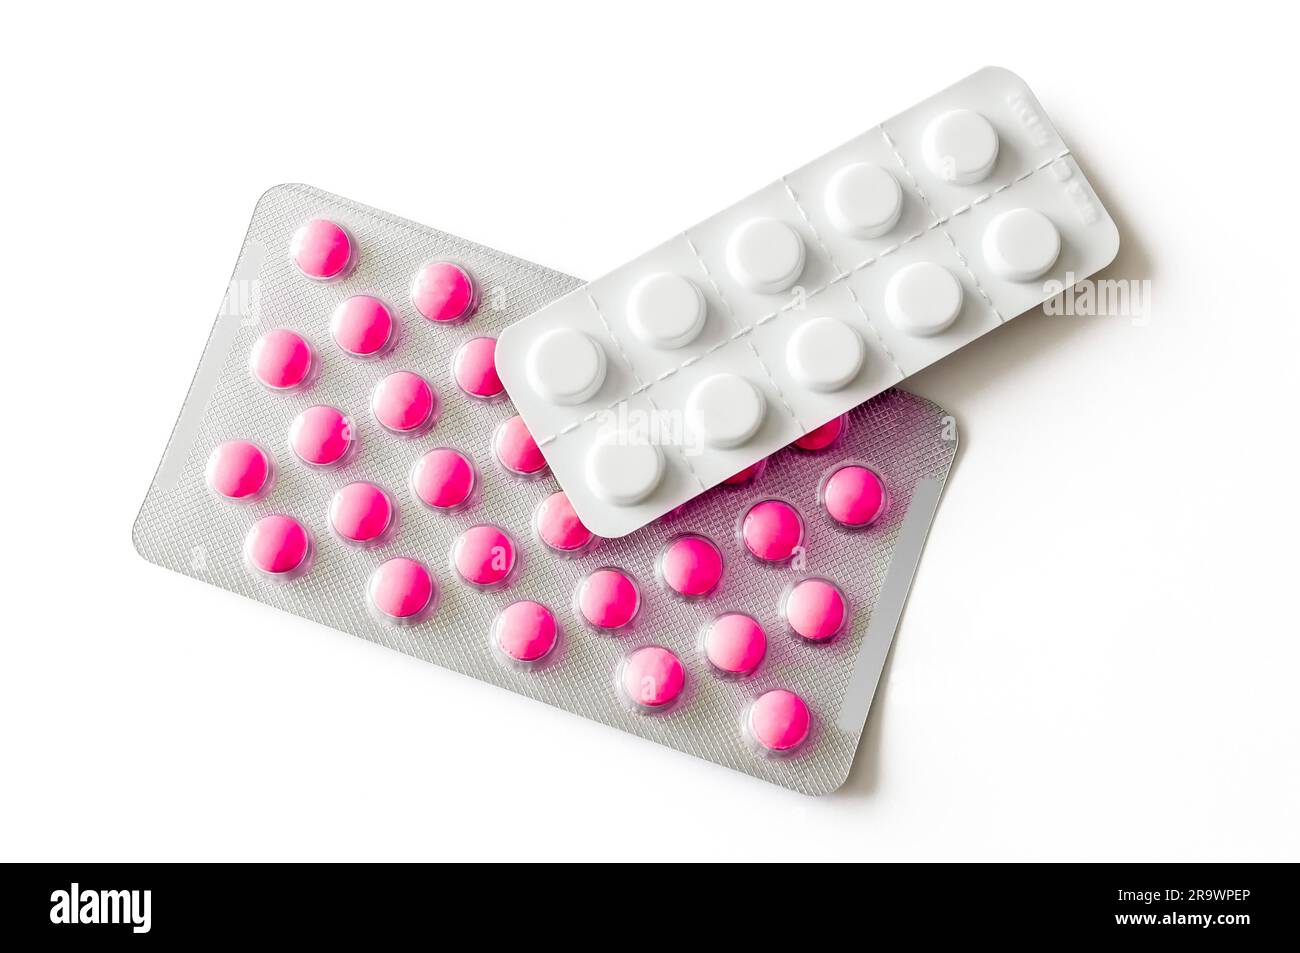 Pills blisters of pharmacy to cure pain and illness Stock Photo